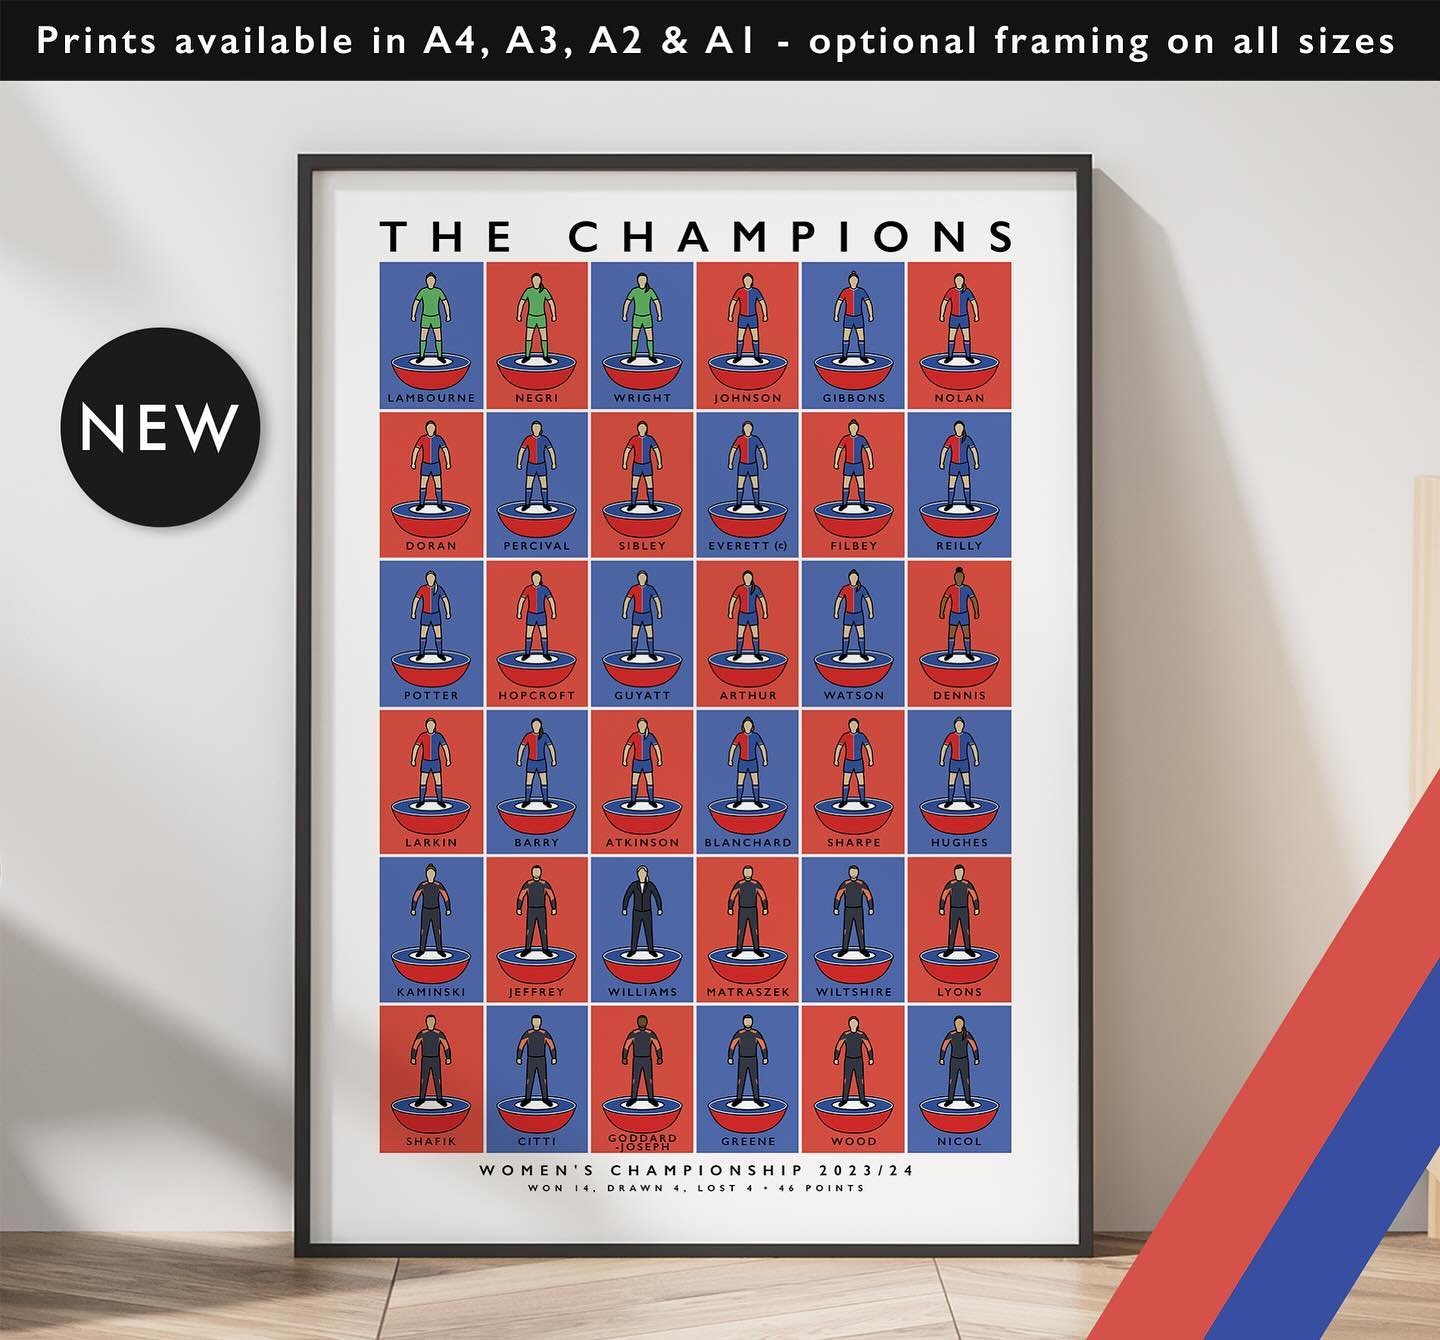 NEW: Crystal Palace Women The Squad 23/24

Prints available in A4, A3, A2 &amp; A1 with optional framing 

Get 10% off until midnight with the discount code: 
THE-EAGLES 

Shop now: matthewjiwood.com/subbuteo-xis/c&hellip;

#CPFC #Eagles #CrystalPala